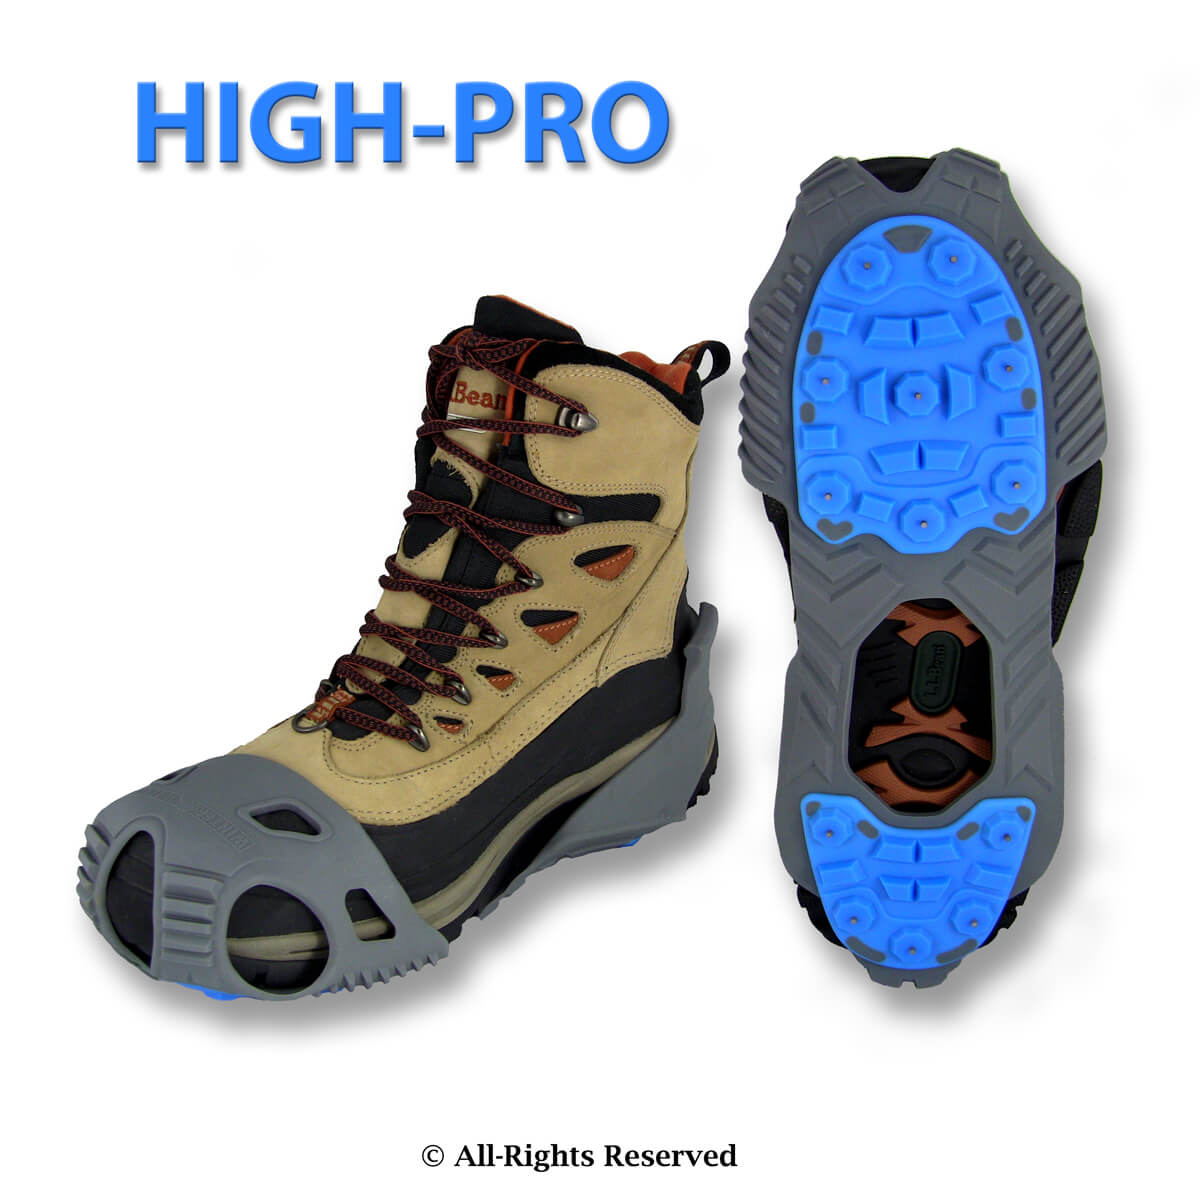 Winter Walking HIGH-PRO Ice Cleats for Shoes and Boots